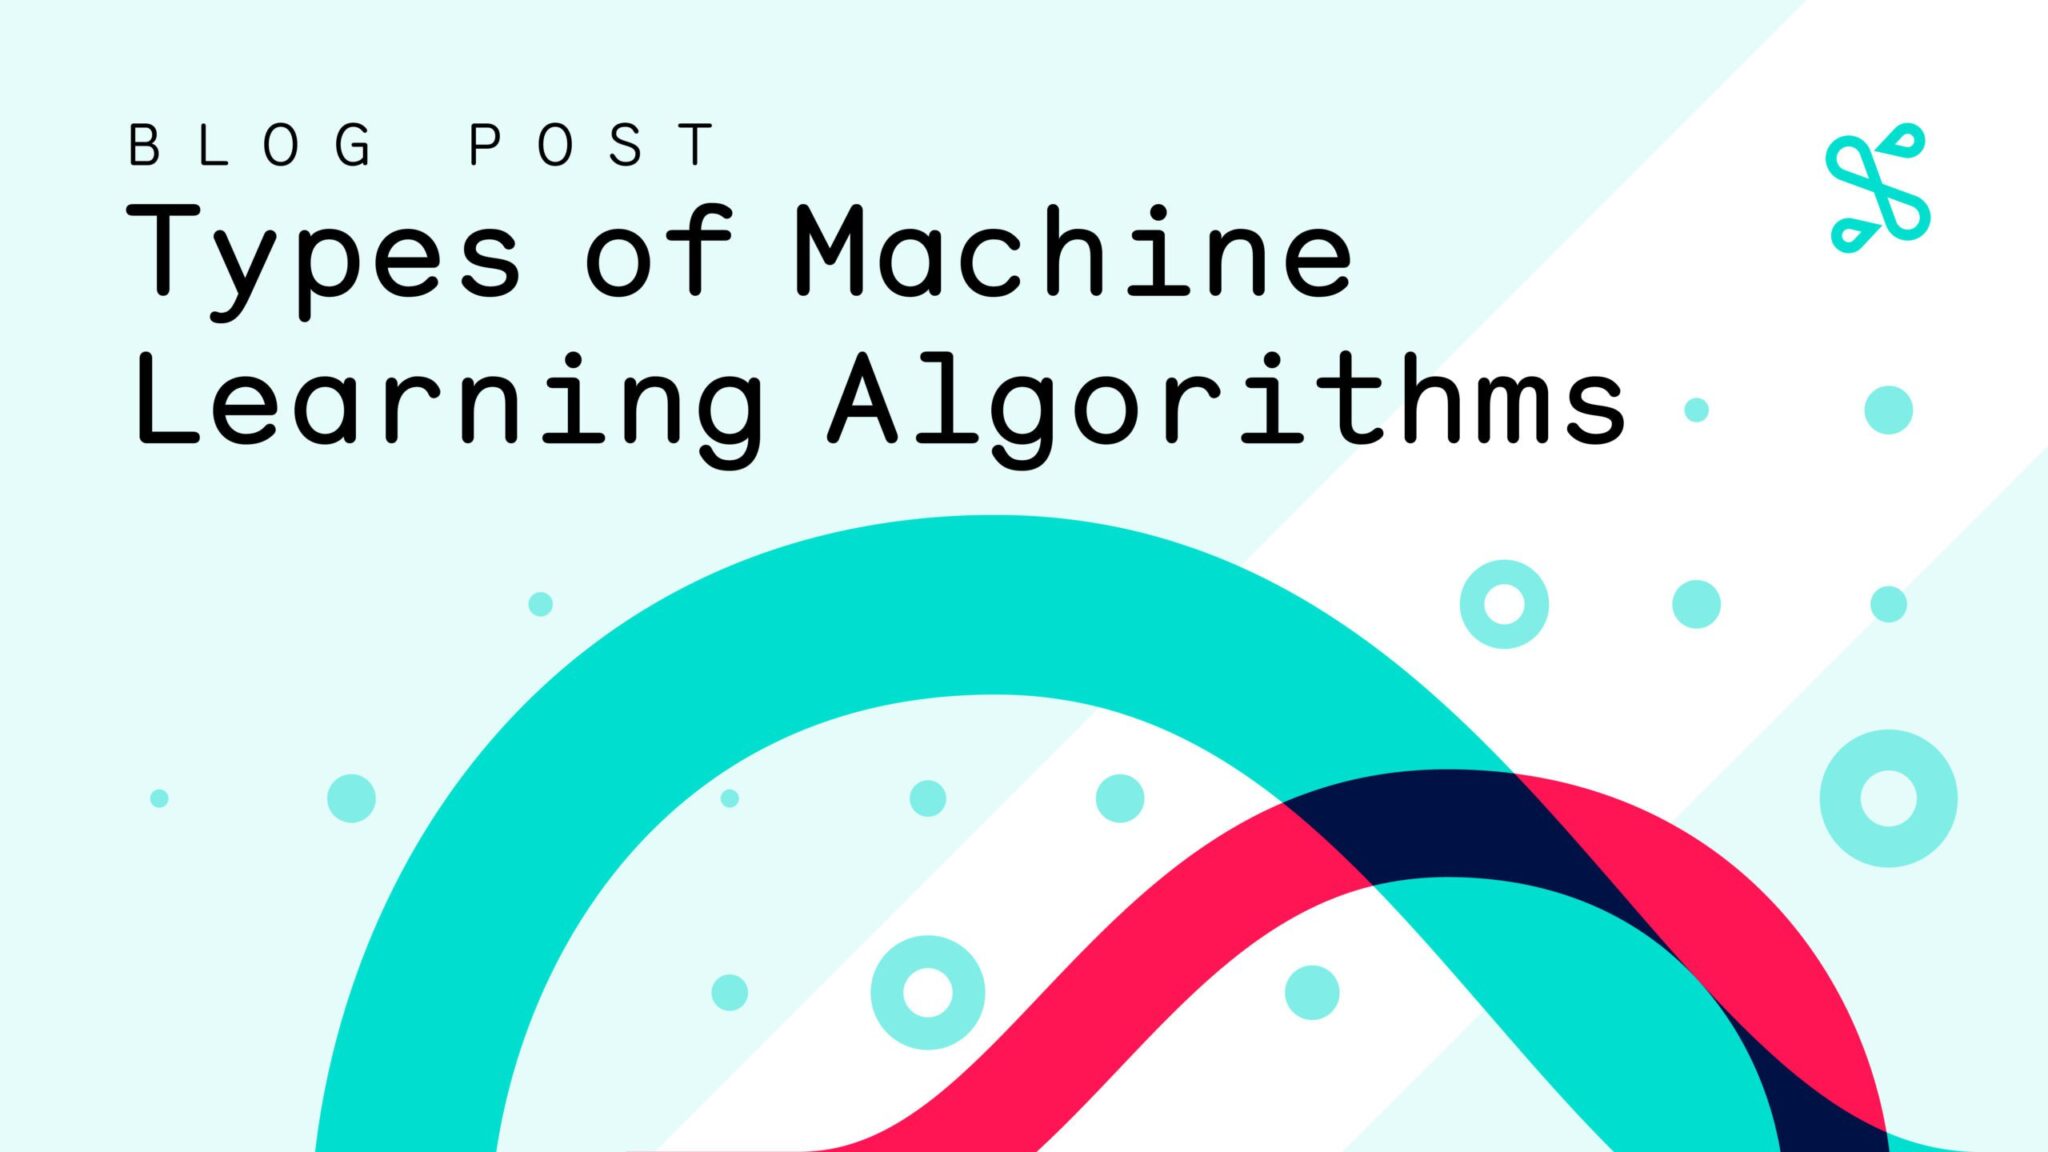 Four Types of Machine Learning Algorithms Explained